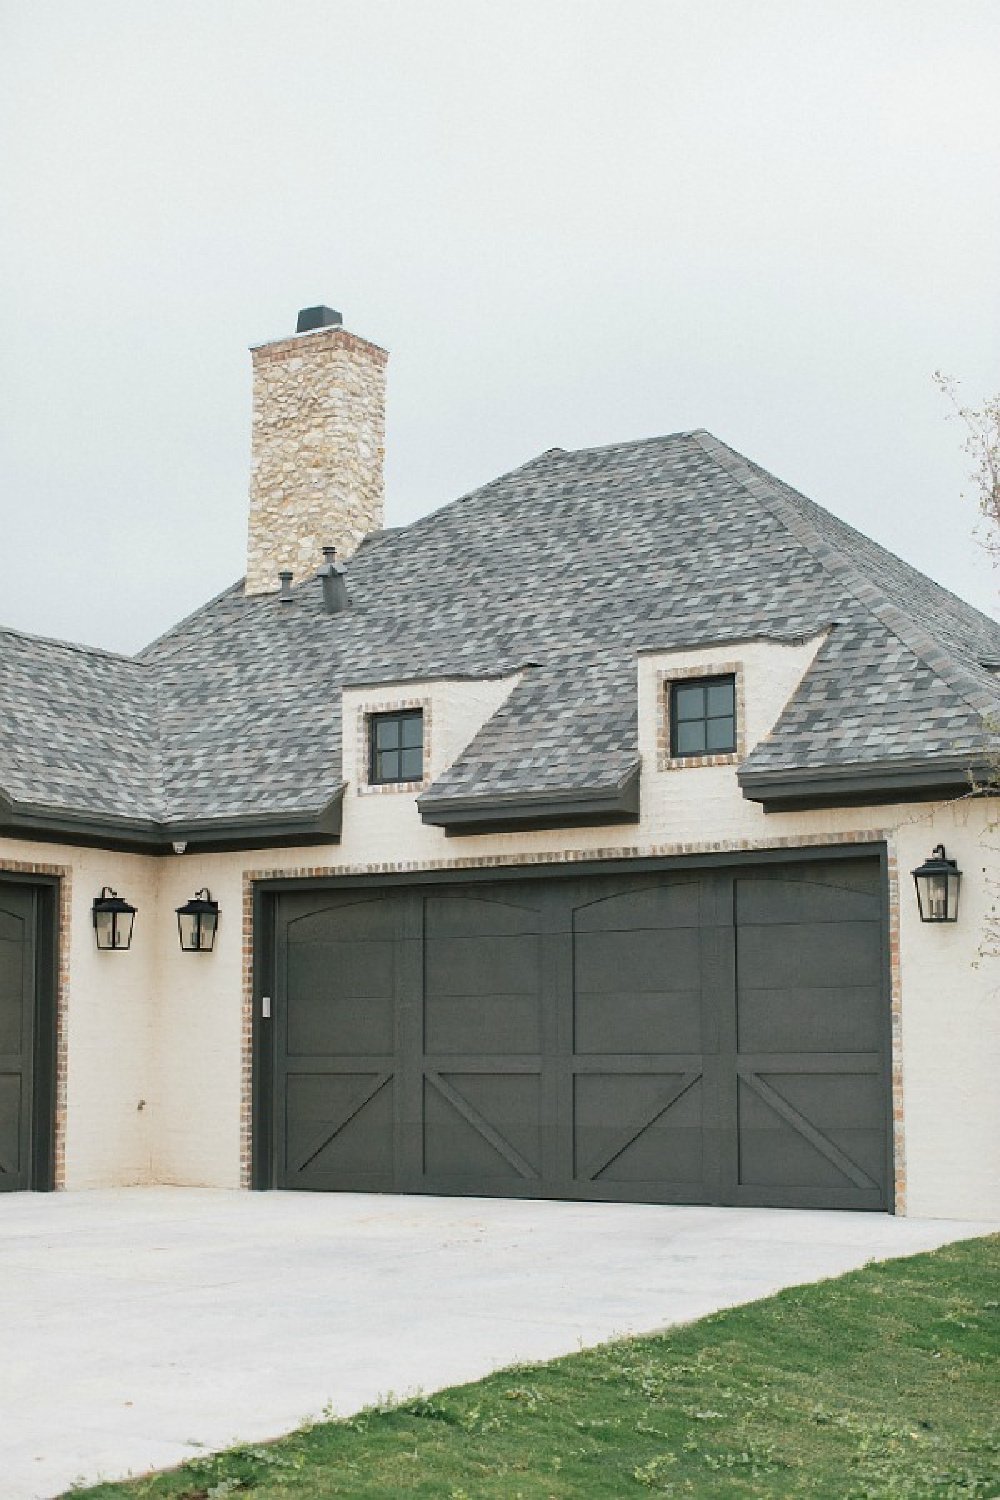 Sealskin paint color on garage. Stucco, brick, stone, and country French architecture for a new home in Texas - Brit Jones Design.